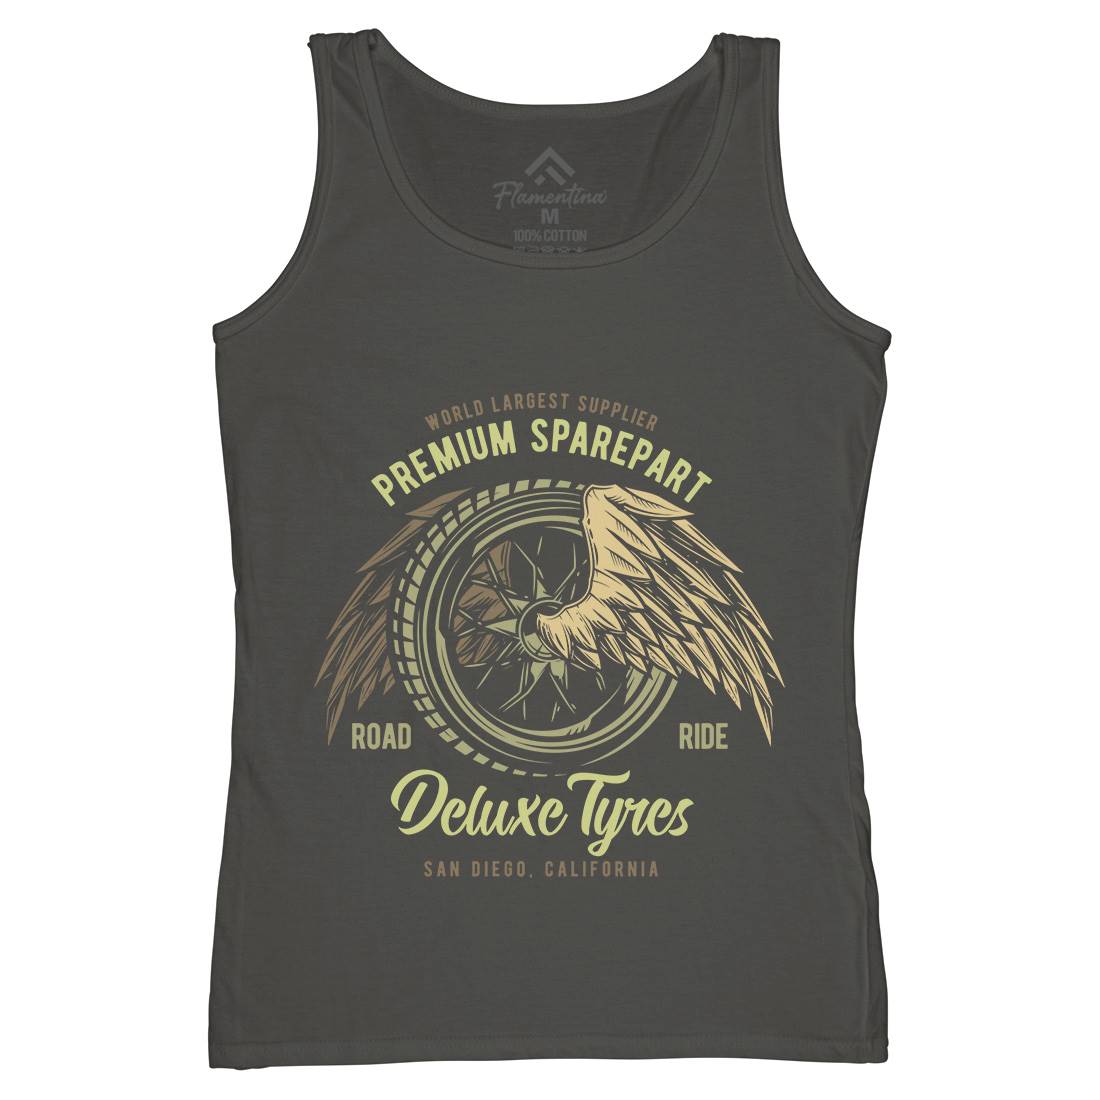 Deluxe Tyres Muscle Car Womens Organic Tank Top Vest Cars B866